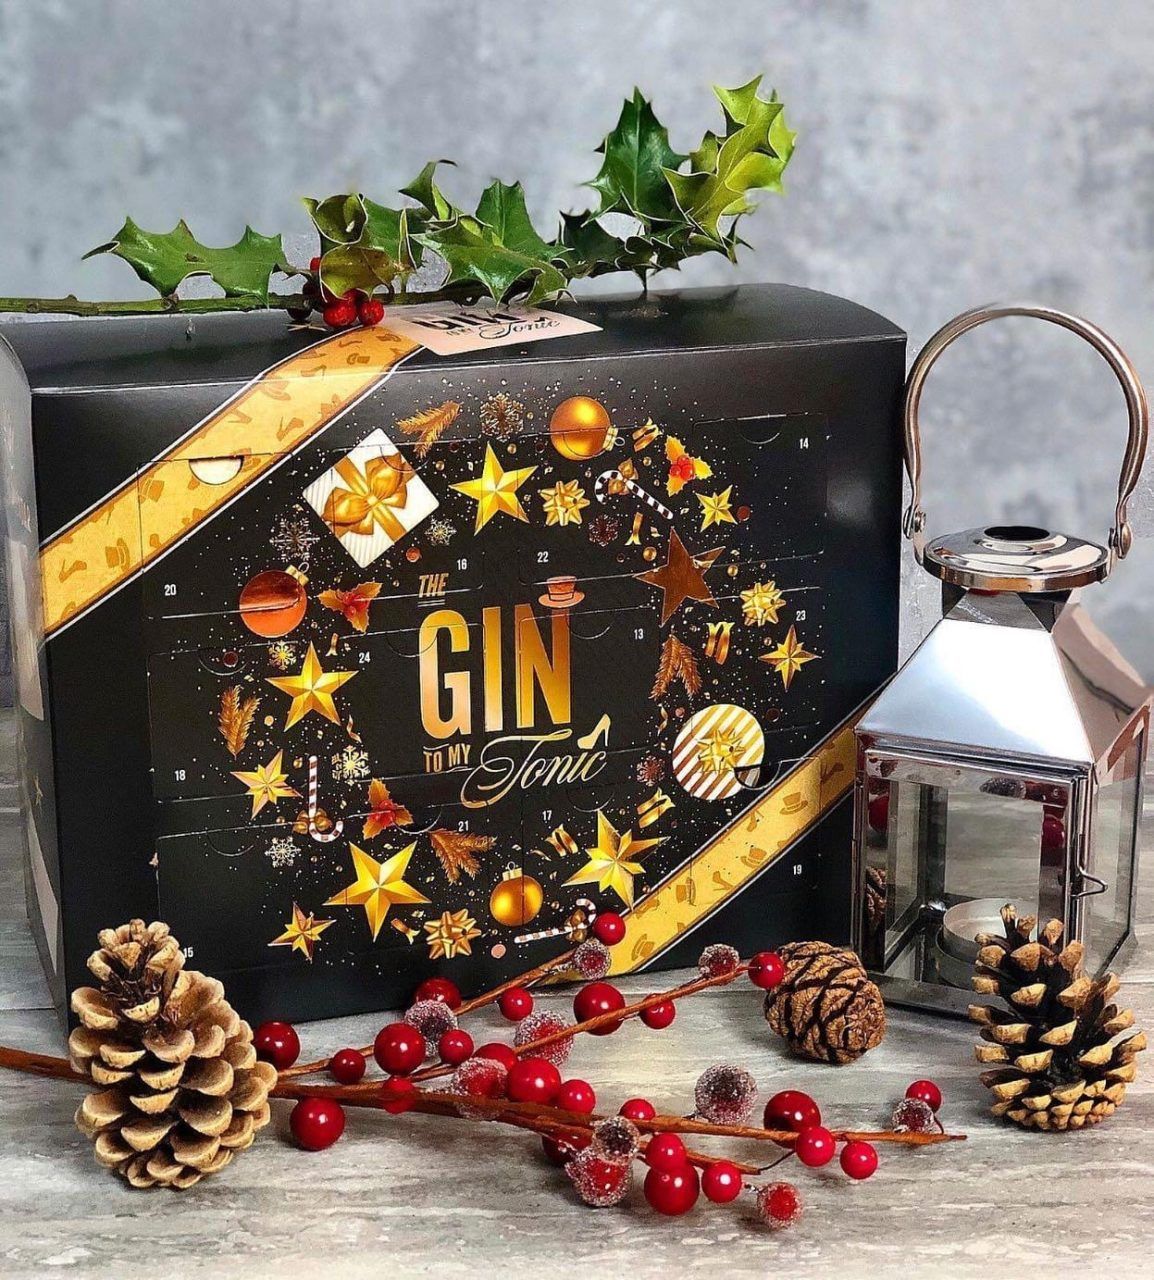 The Gin To My Tonic Christmas Advent Calendar with festive accessories on a sparkly background